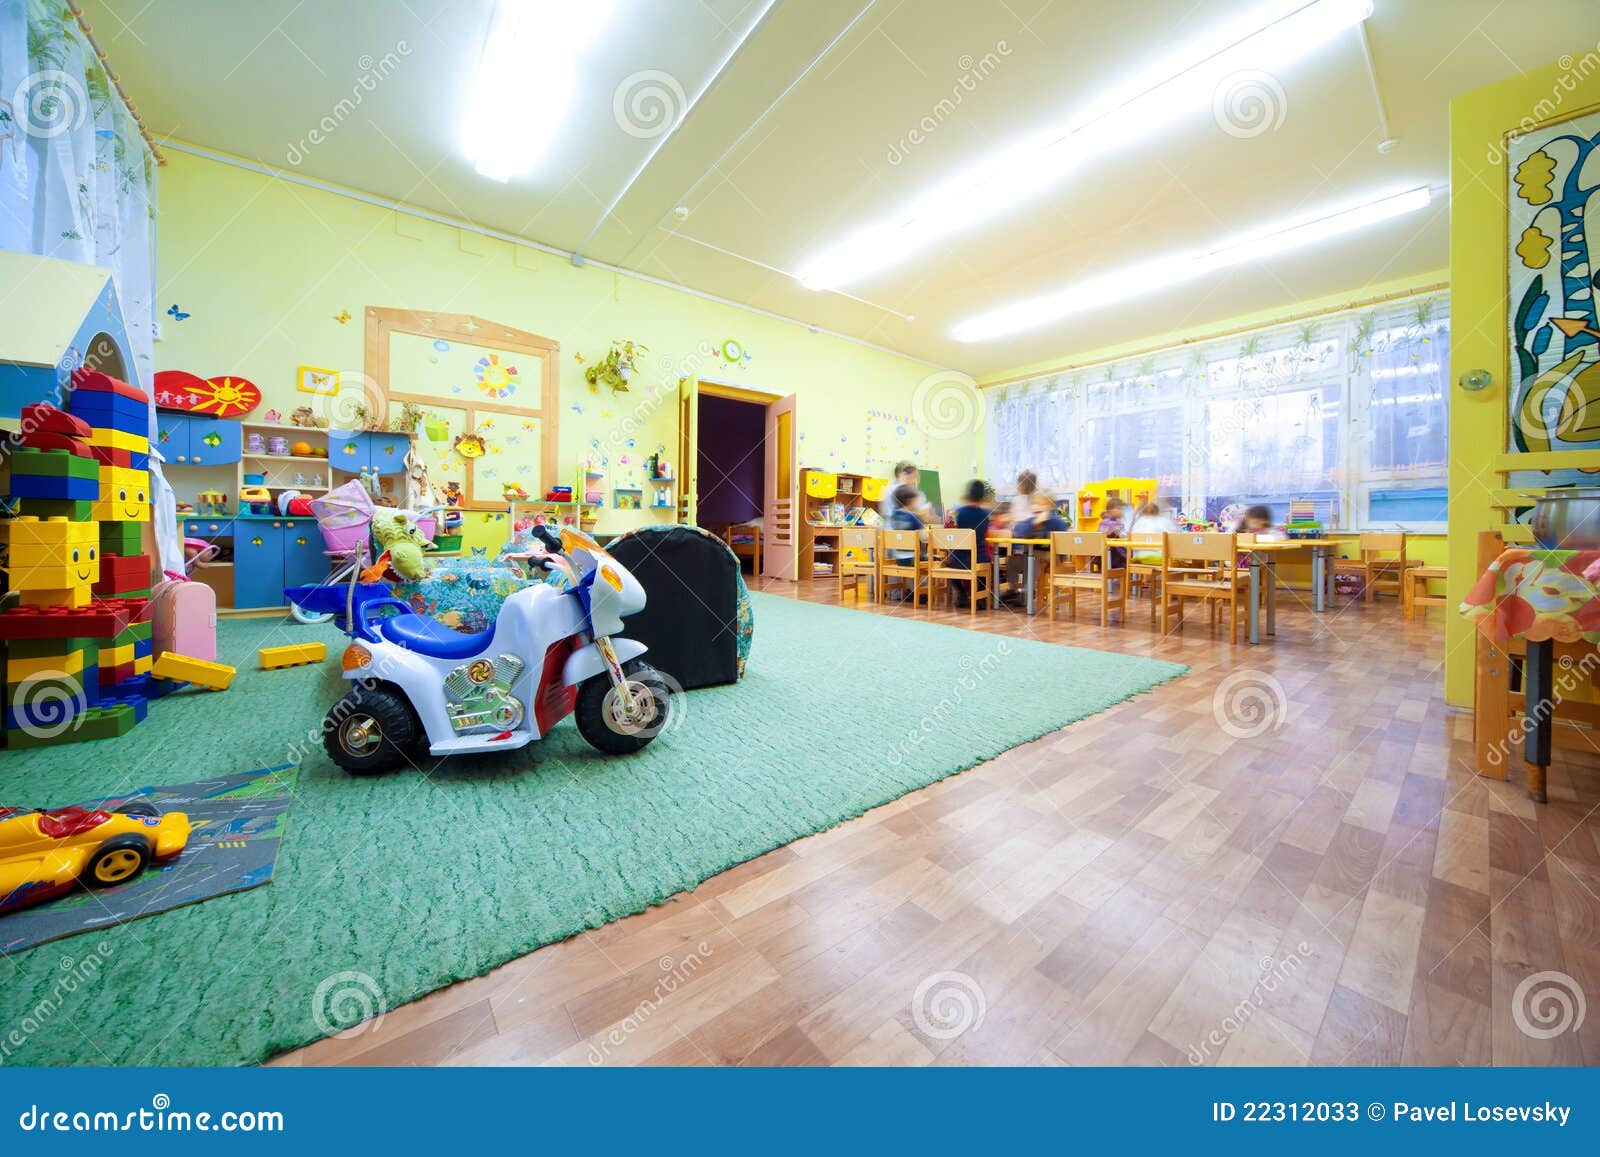 children play to room where many toys.